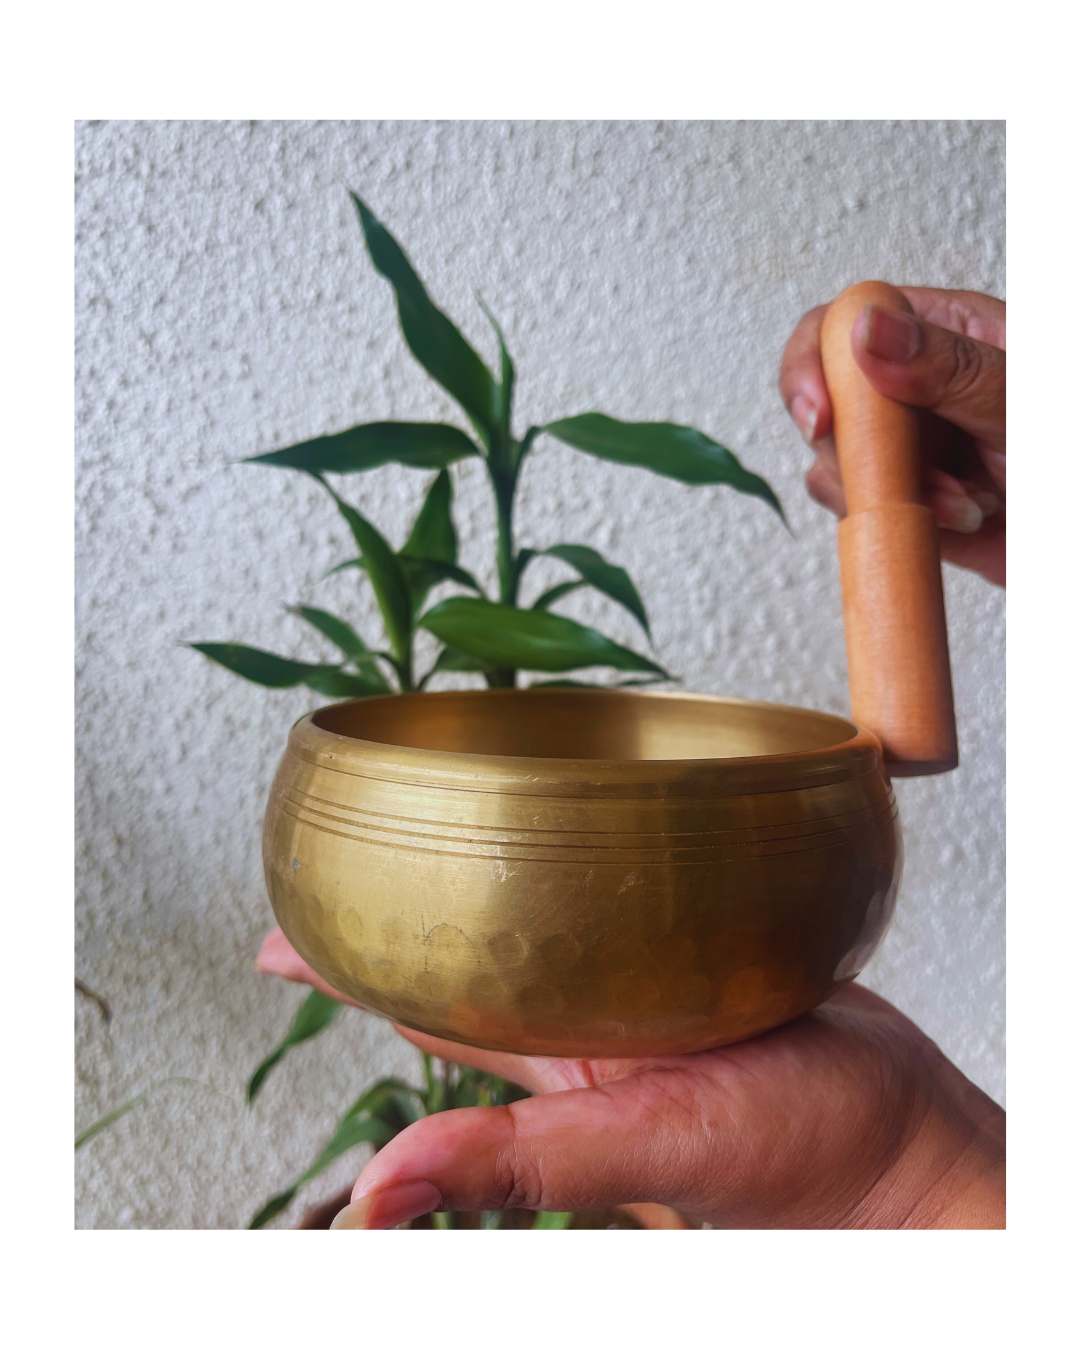 Singing Bowl - 5-metal Panchaloha Hand-hammered Bowl (4.5 inch) with Wooden Mallet